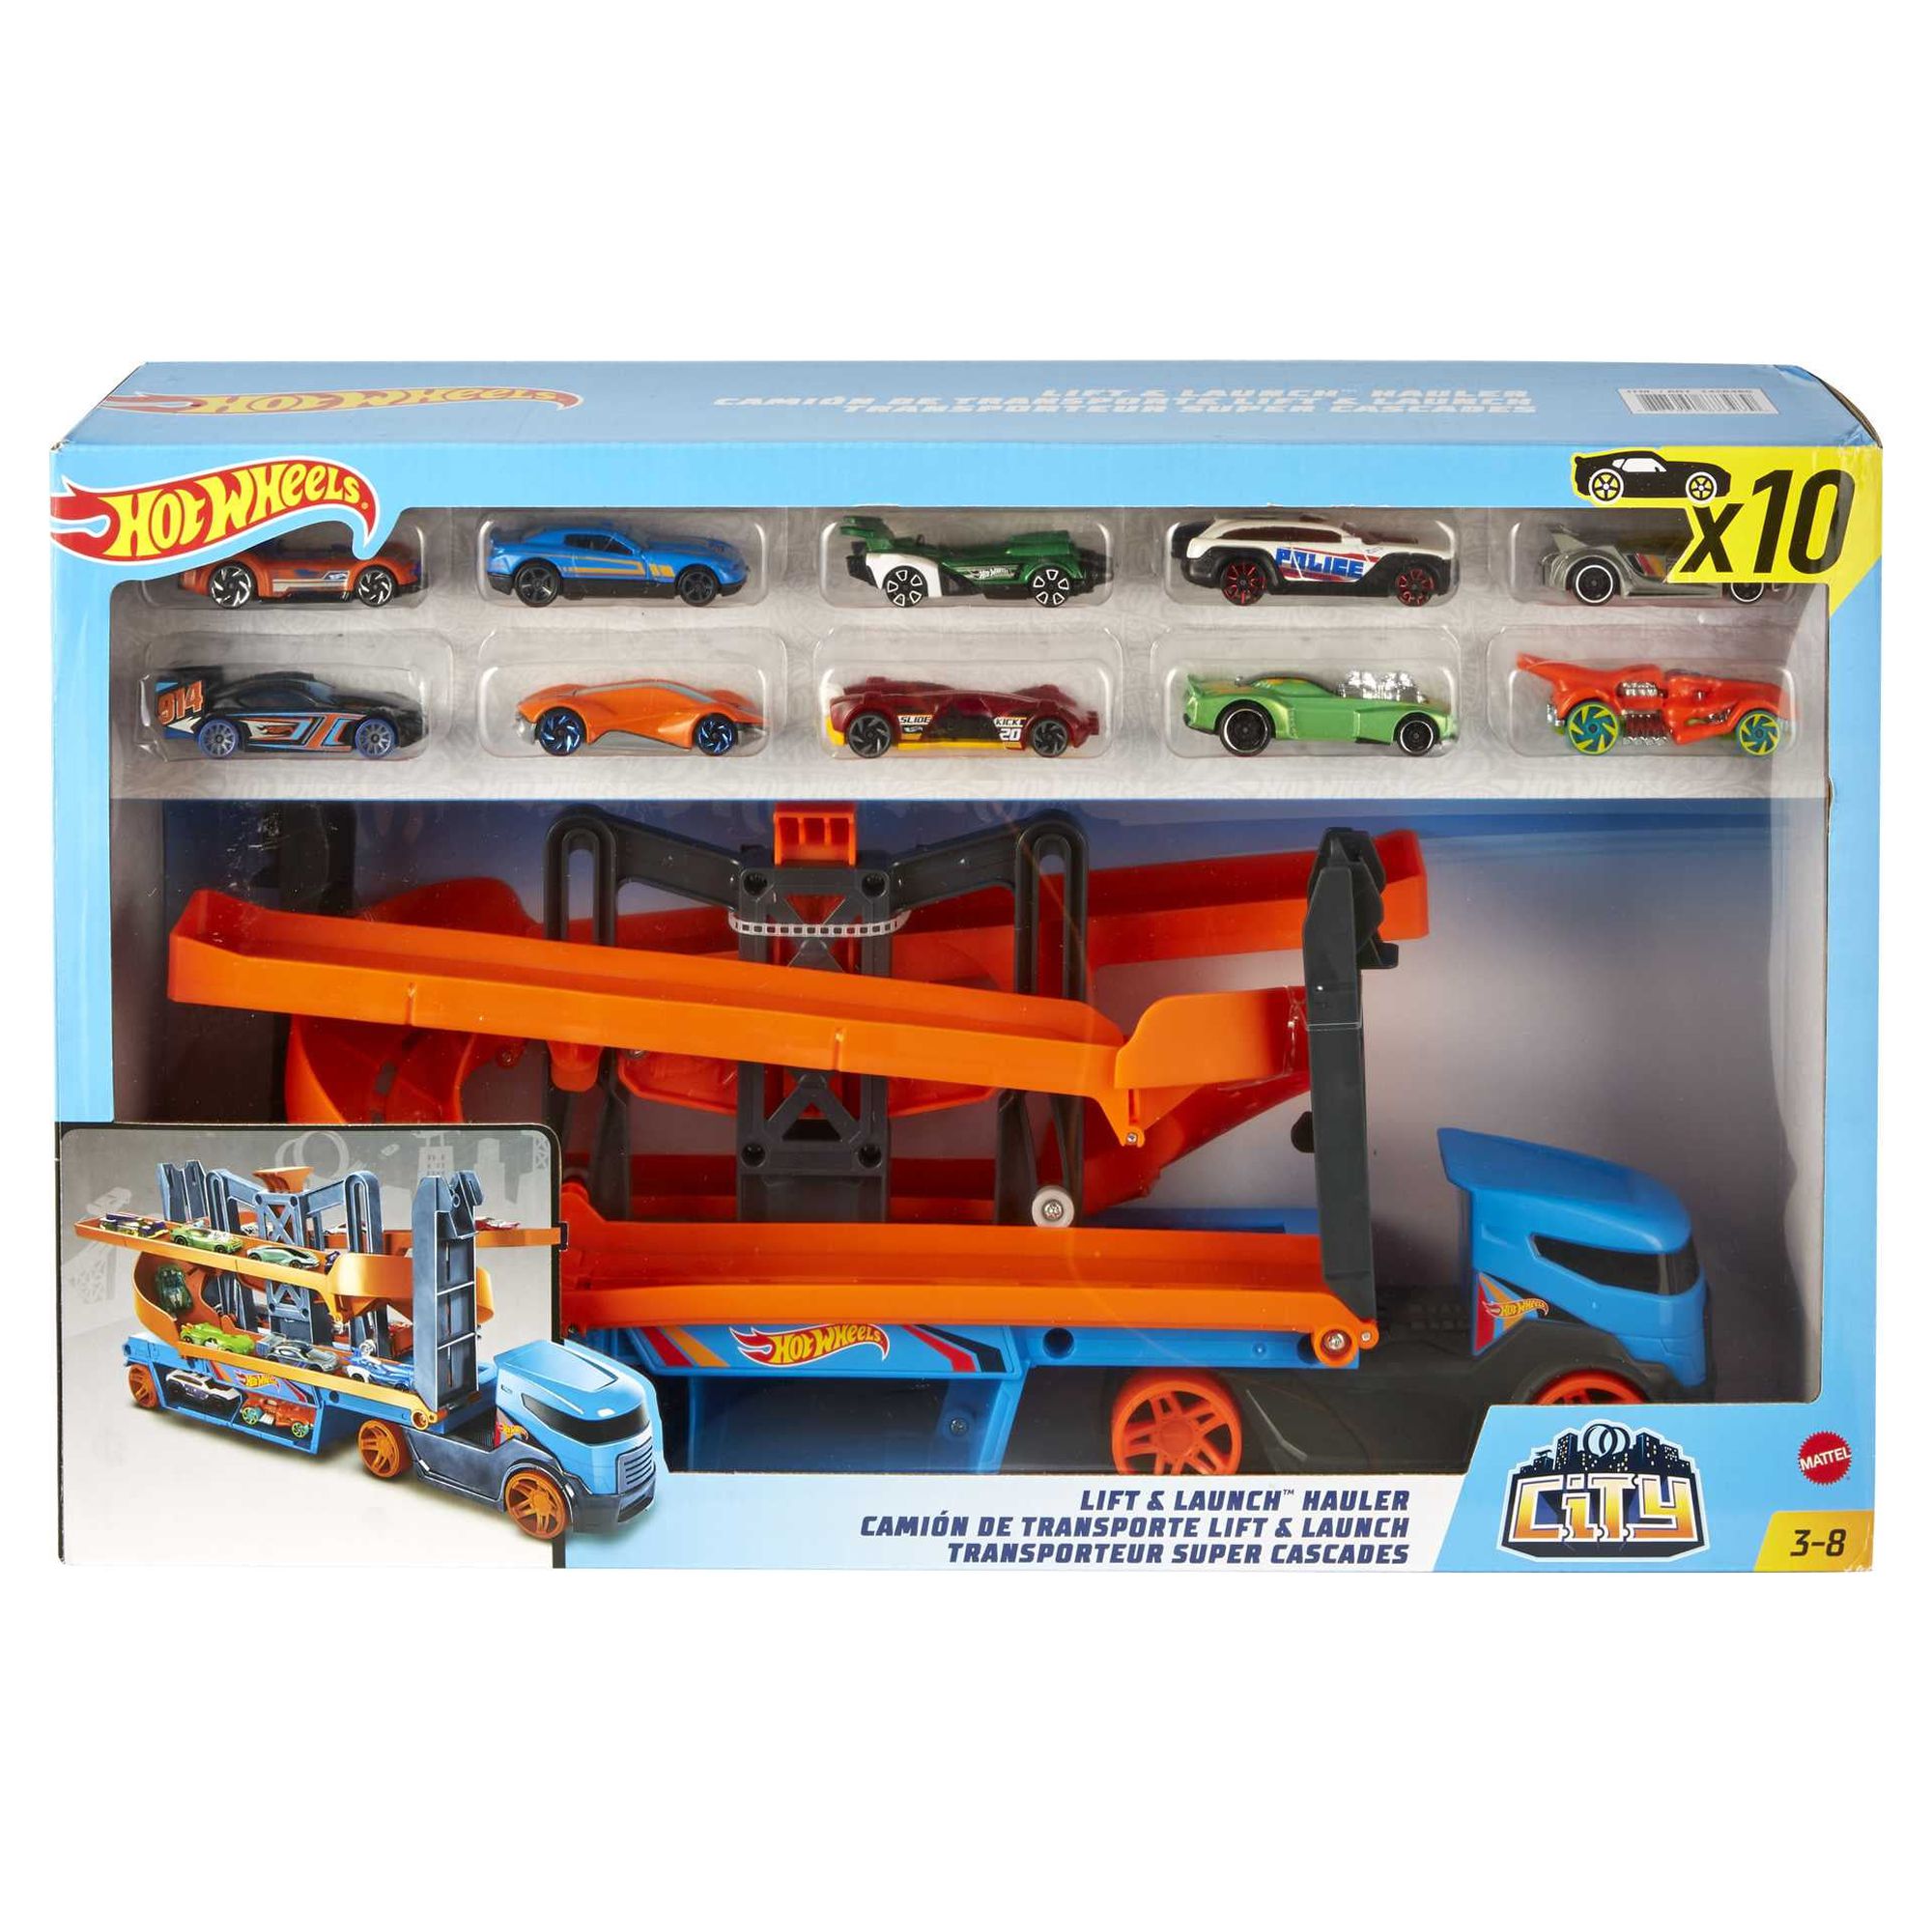 Hot Wheels Lift & Launch Hauler Toy Truck with 10 Cars in 1:64 Scale, Transporter Stores 20 Vehicles - image 6 of 6